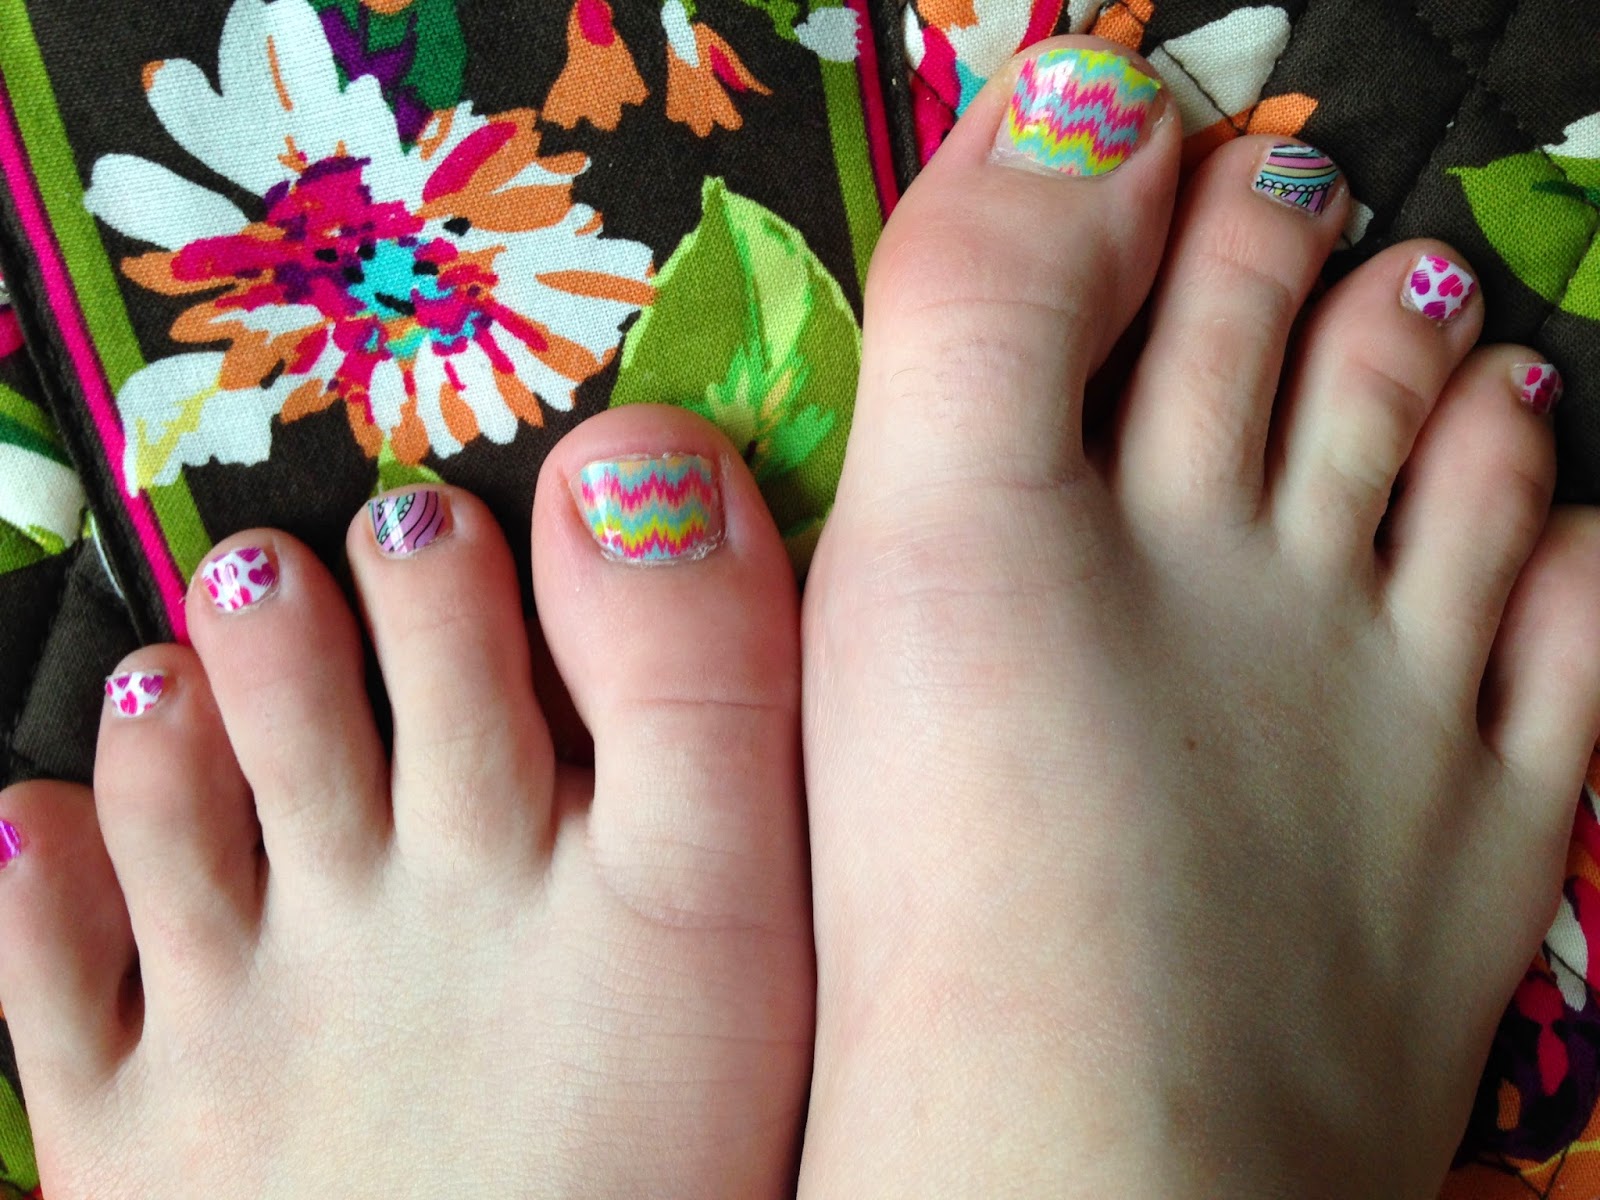 Morning Glories and Moonflowers: jamberry nails review and giveaway